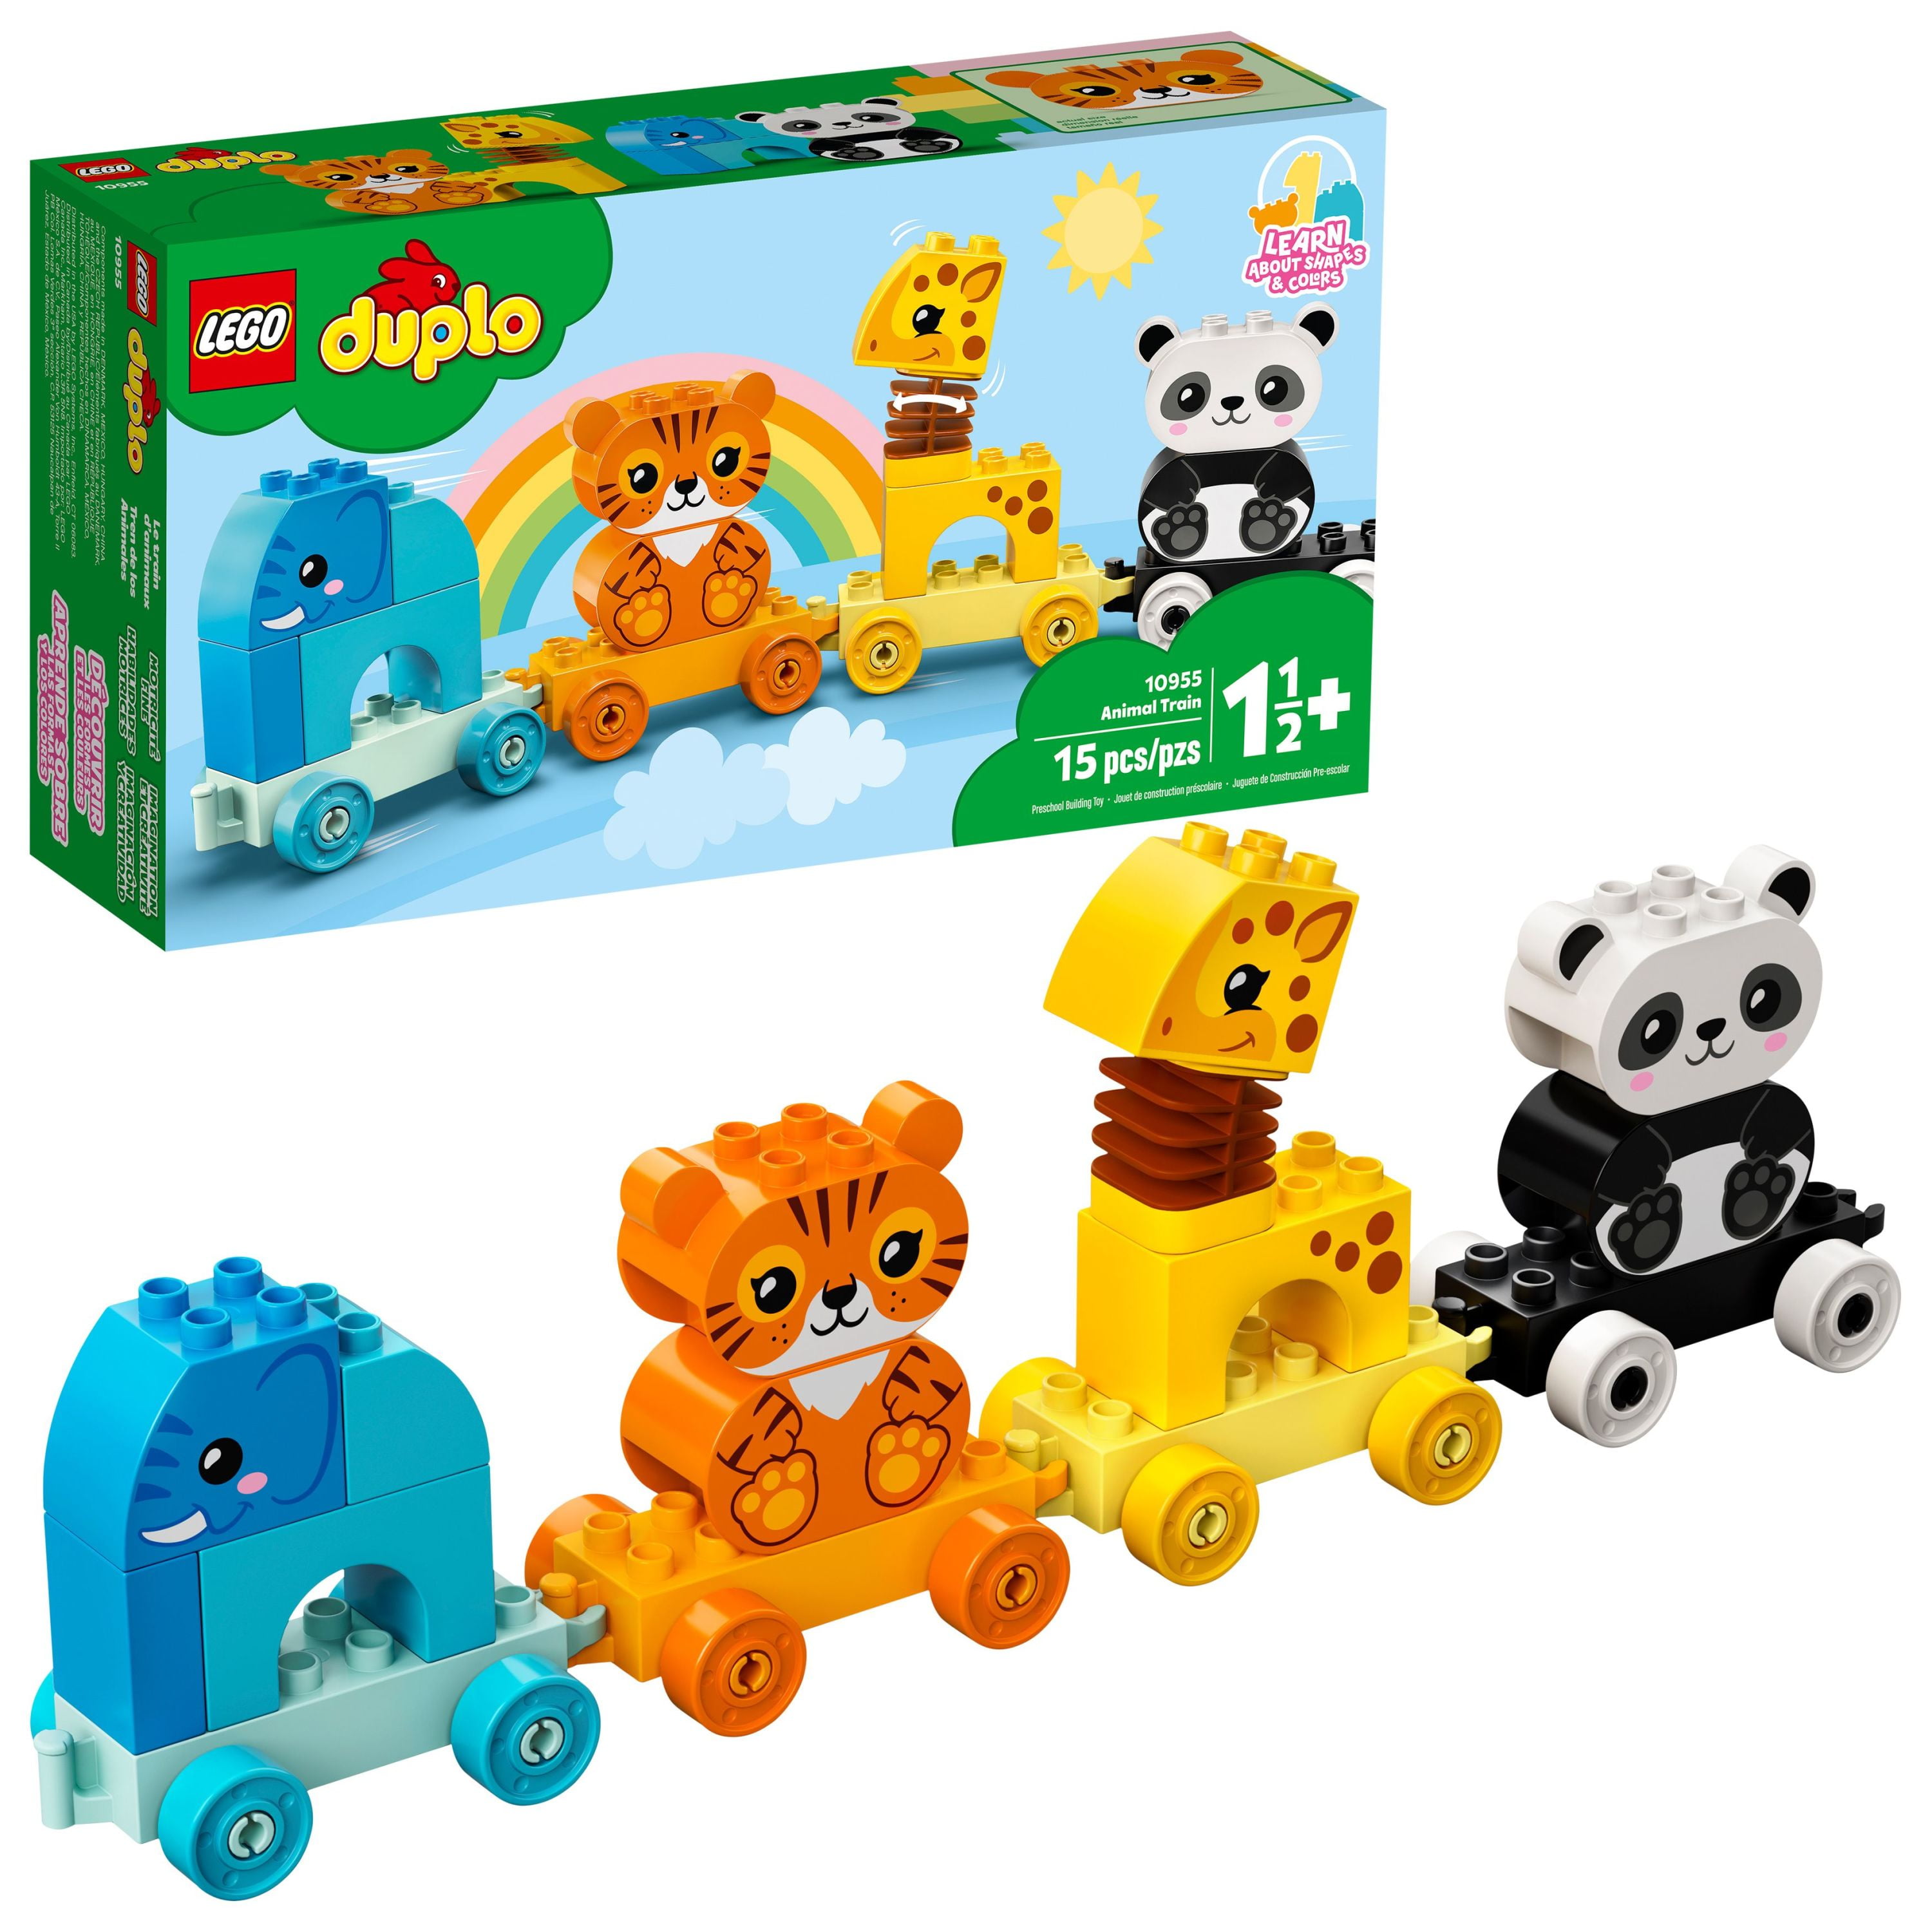 LEGO DUPLO My First Animal Train 10955, Toys for Toddlers and Kids 1.5 3 Years Old with Elephant, Tiger, Panda and Giraffe Figures, Learning Toy - Walmart.com